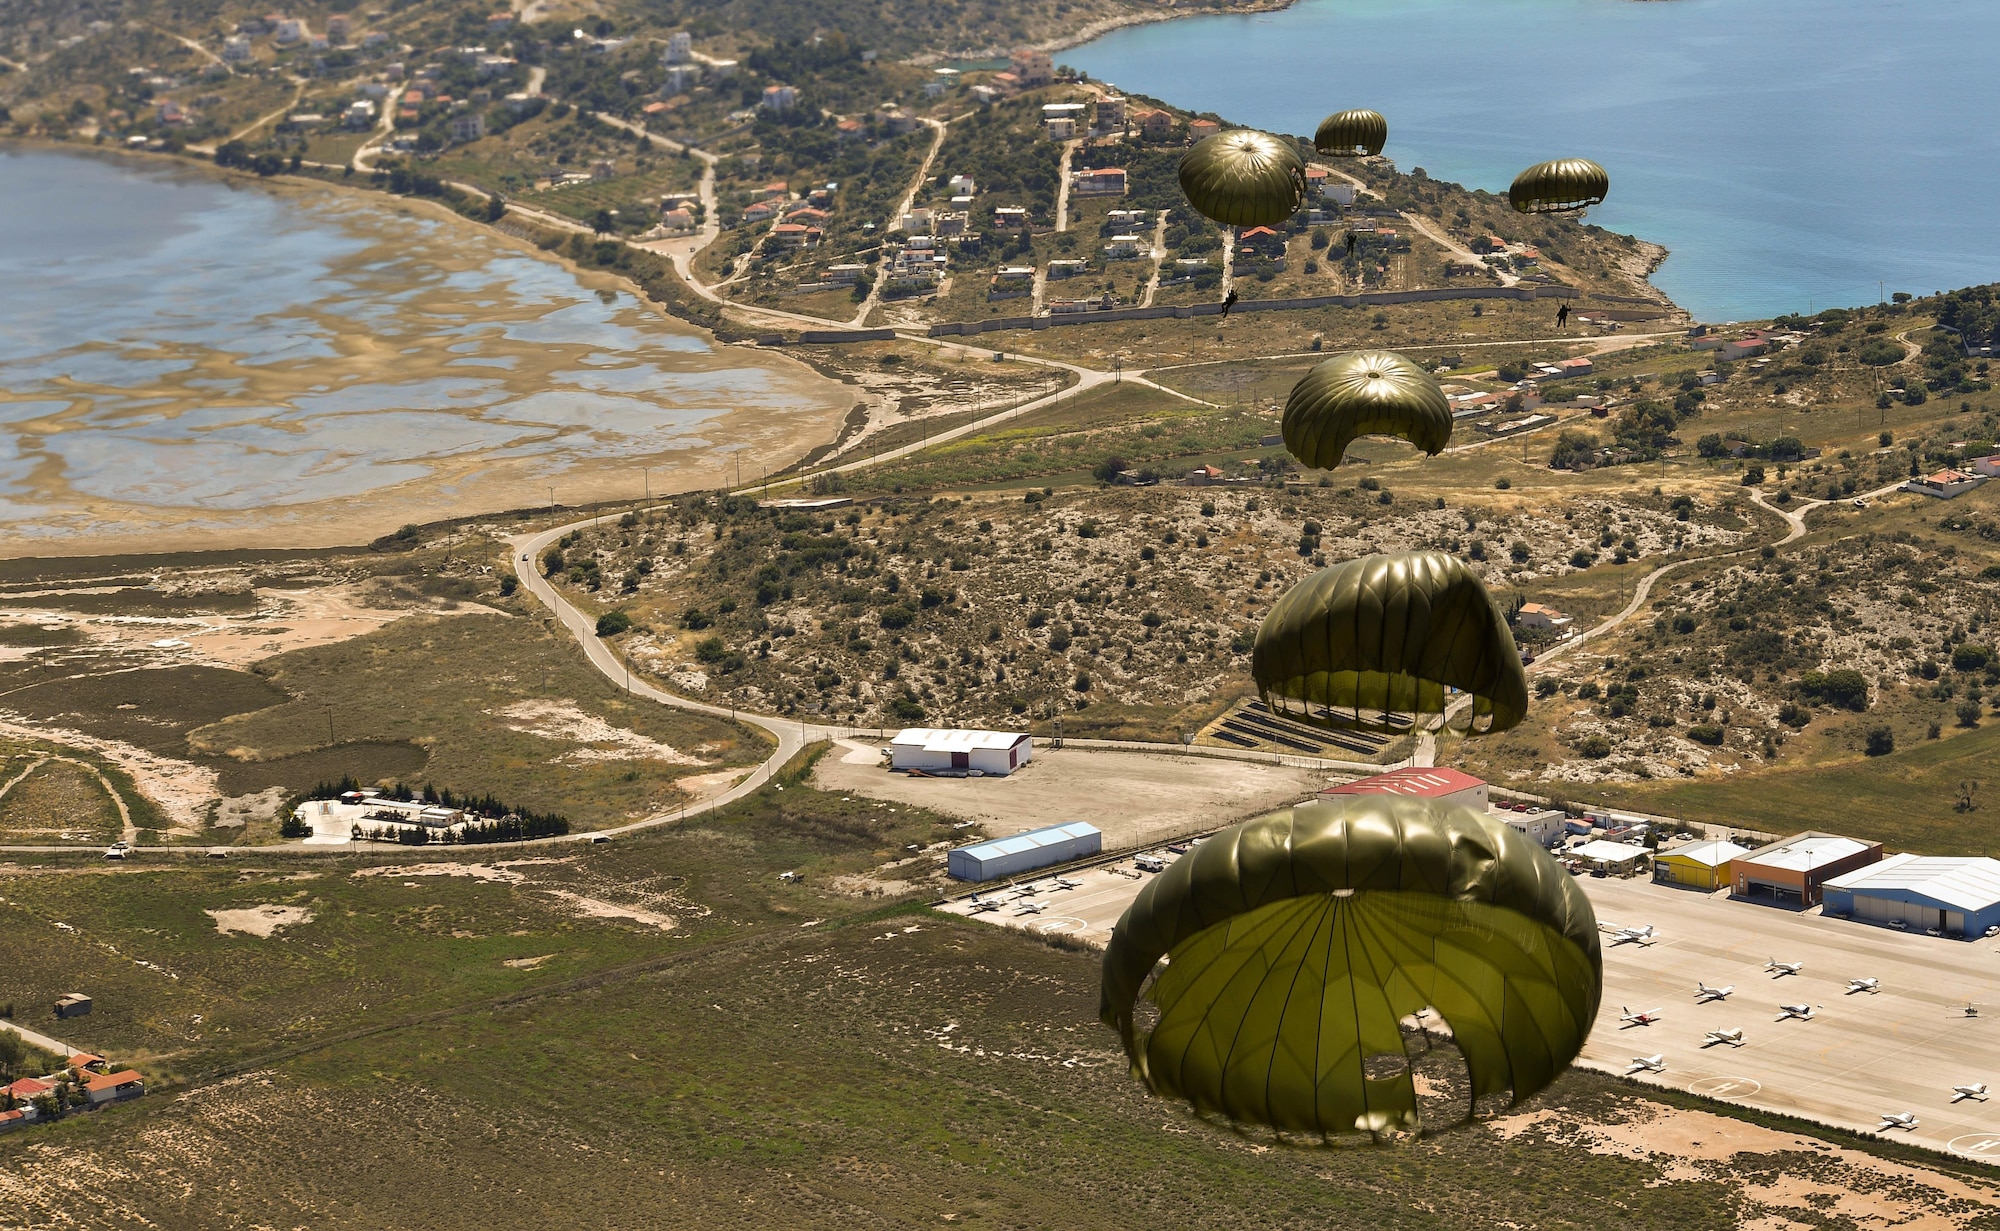 Greek paratroopers conduct a static-line jump from a U.S. Air Force C-130J Super Hercules during Exercise Stolen Cerberus IV above Megara, Greece, April 26, 2017. Throughout the exercise, U.S. Air Force and Army servicemembers worked alongside the Hellenic air force to achieve personnel and cargo drops. The purpose of the exercise was to train U.S. and Greek forces while strengthening the partnership between two NATO allies. (U.S Air Force photo by Senior Airman Tryphena Mayhugh)